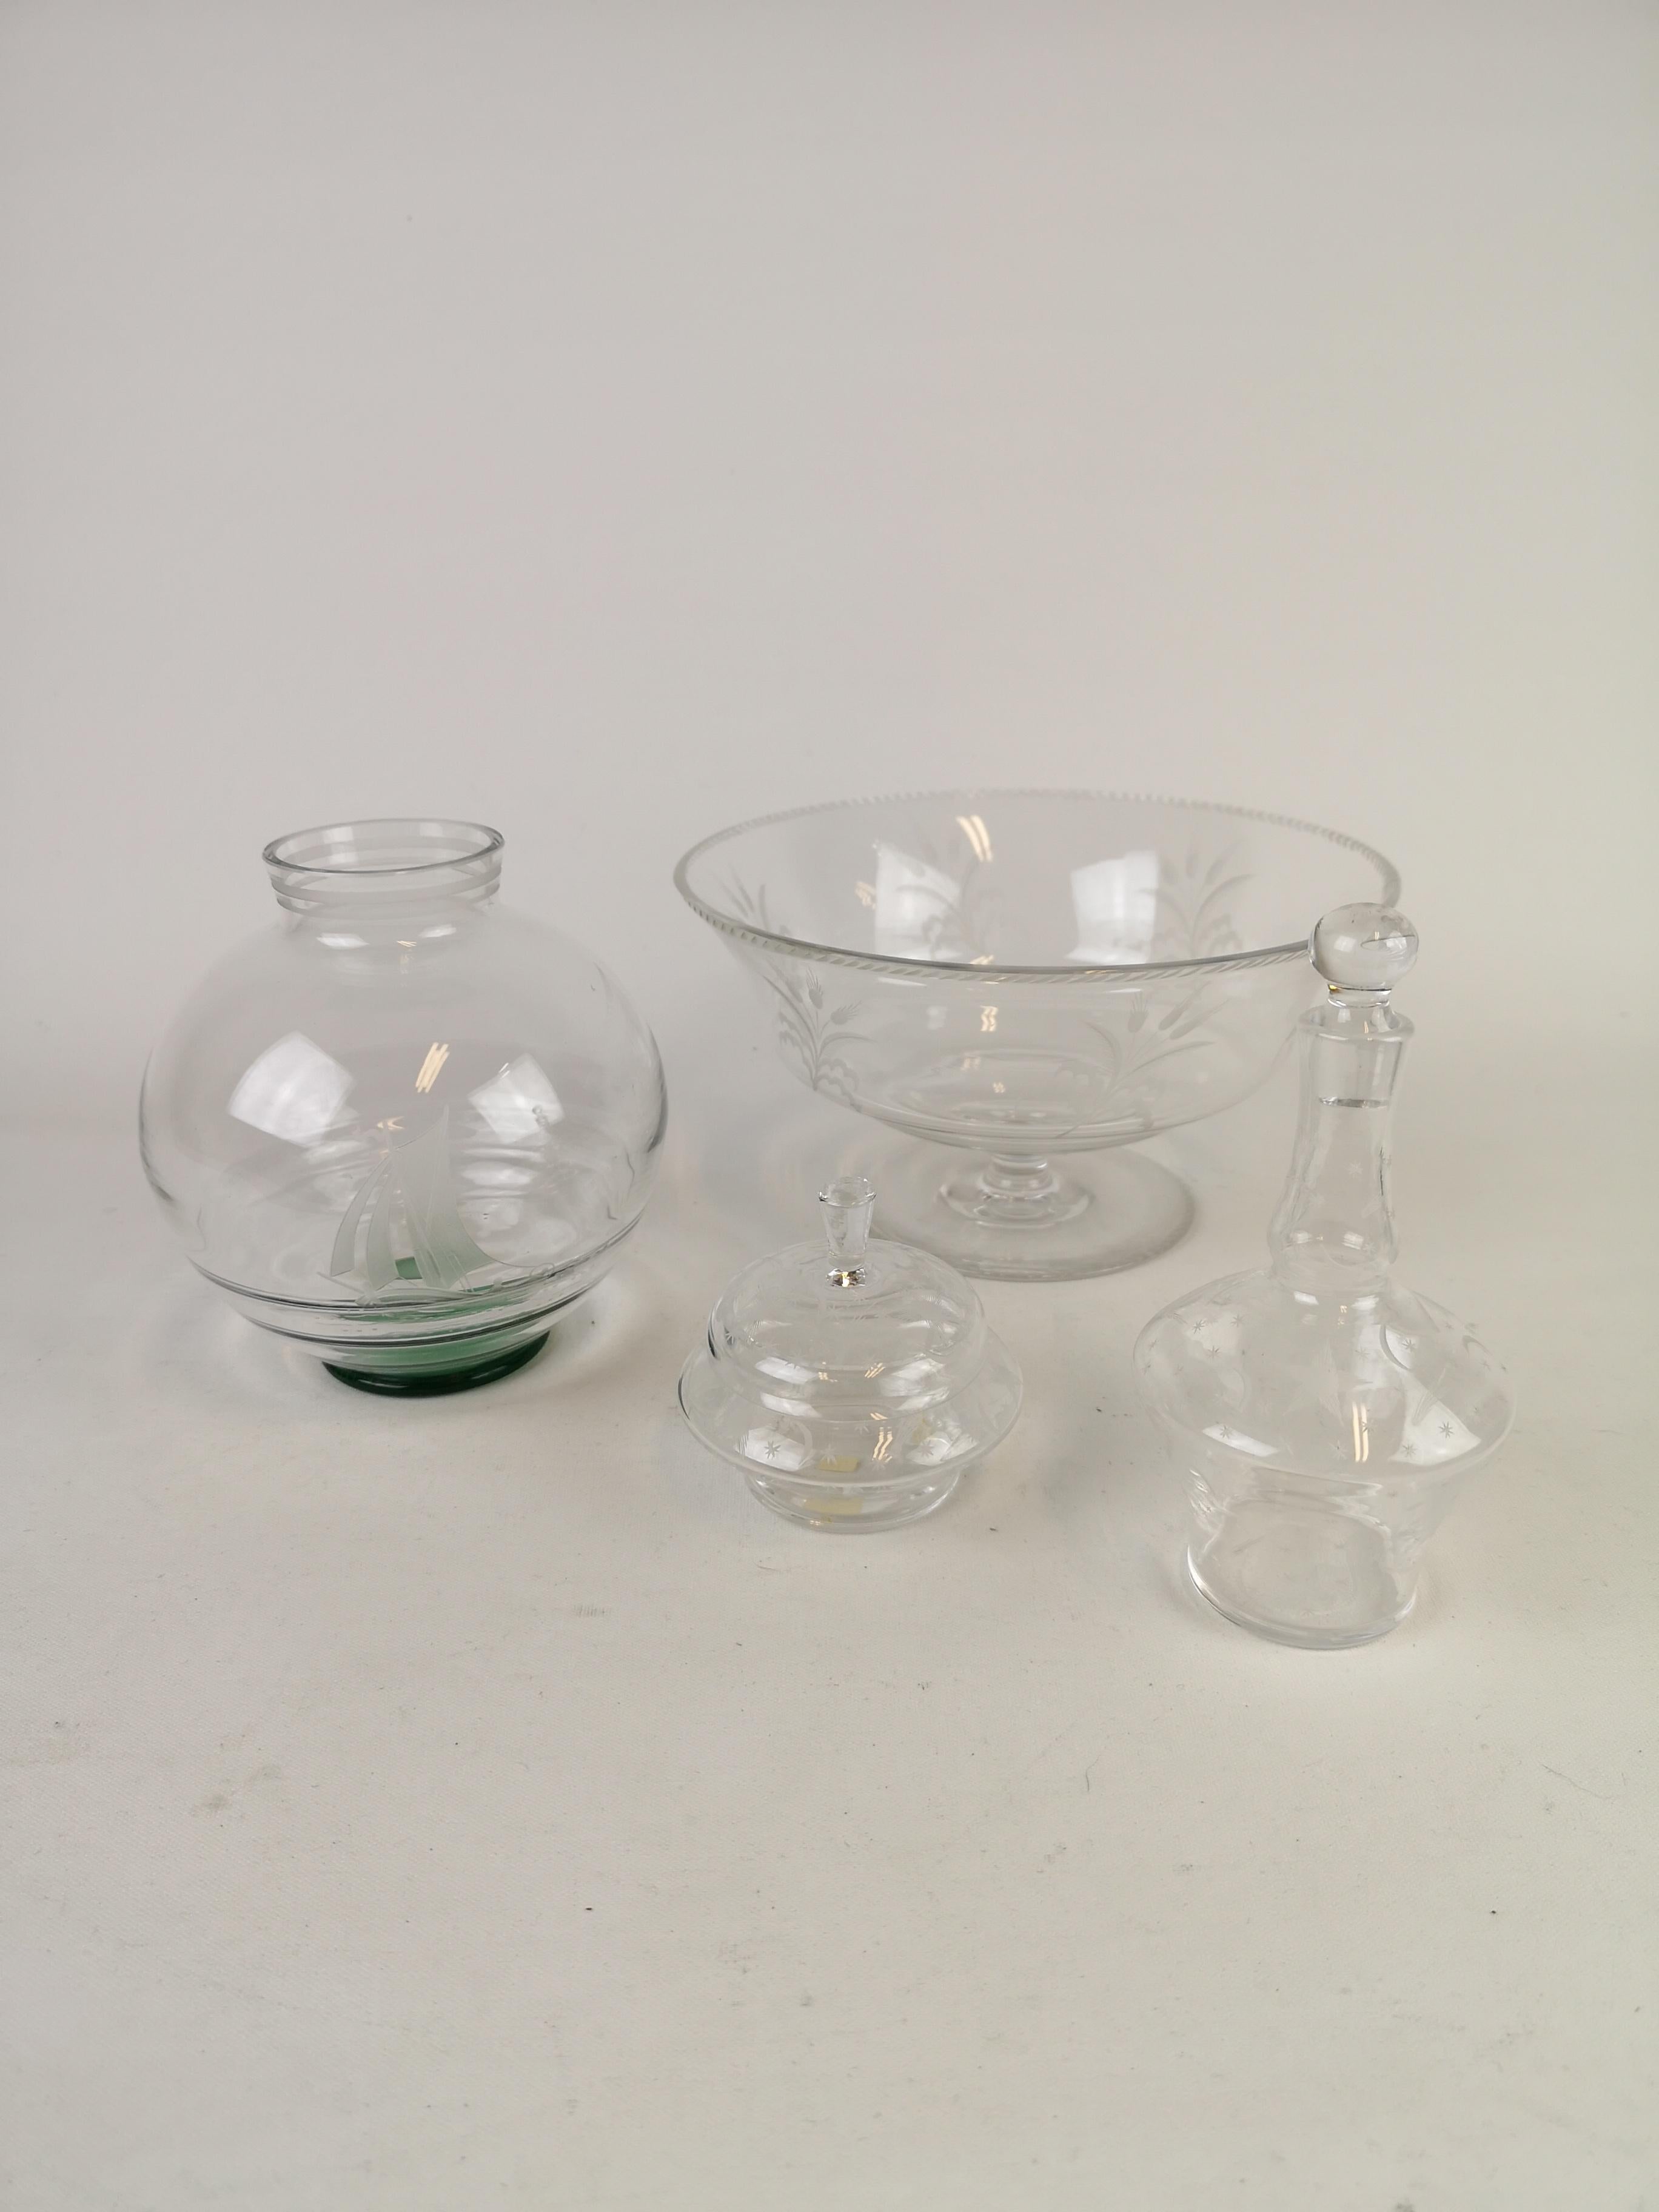 This set of 4 pieces where manufactured at Orrefors in Sweden, circa 1930s. They are what referred as Swedish Grace, the Swedish Art Deco style. They are all signed. The items are one round vase, a bowl, one small bottle and one small bowl with a